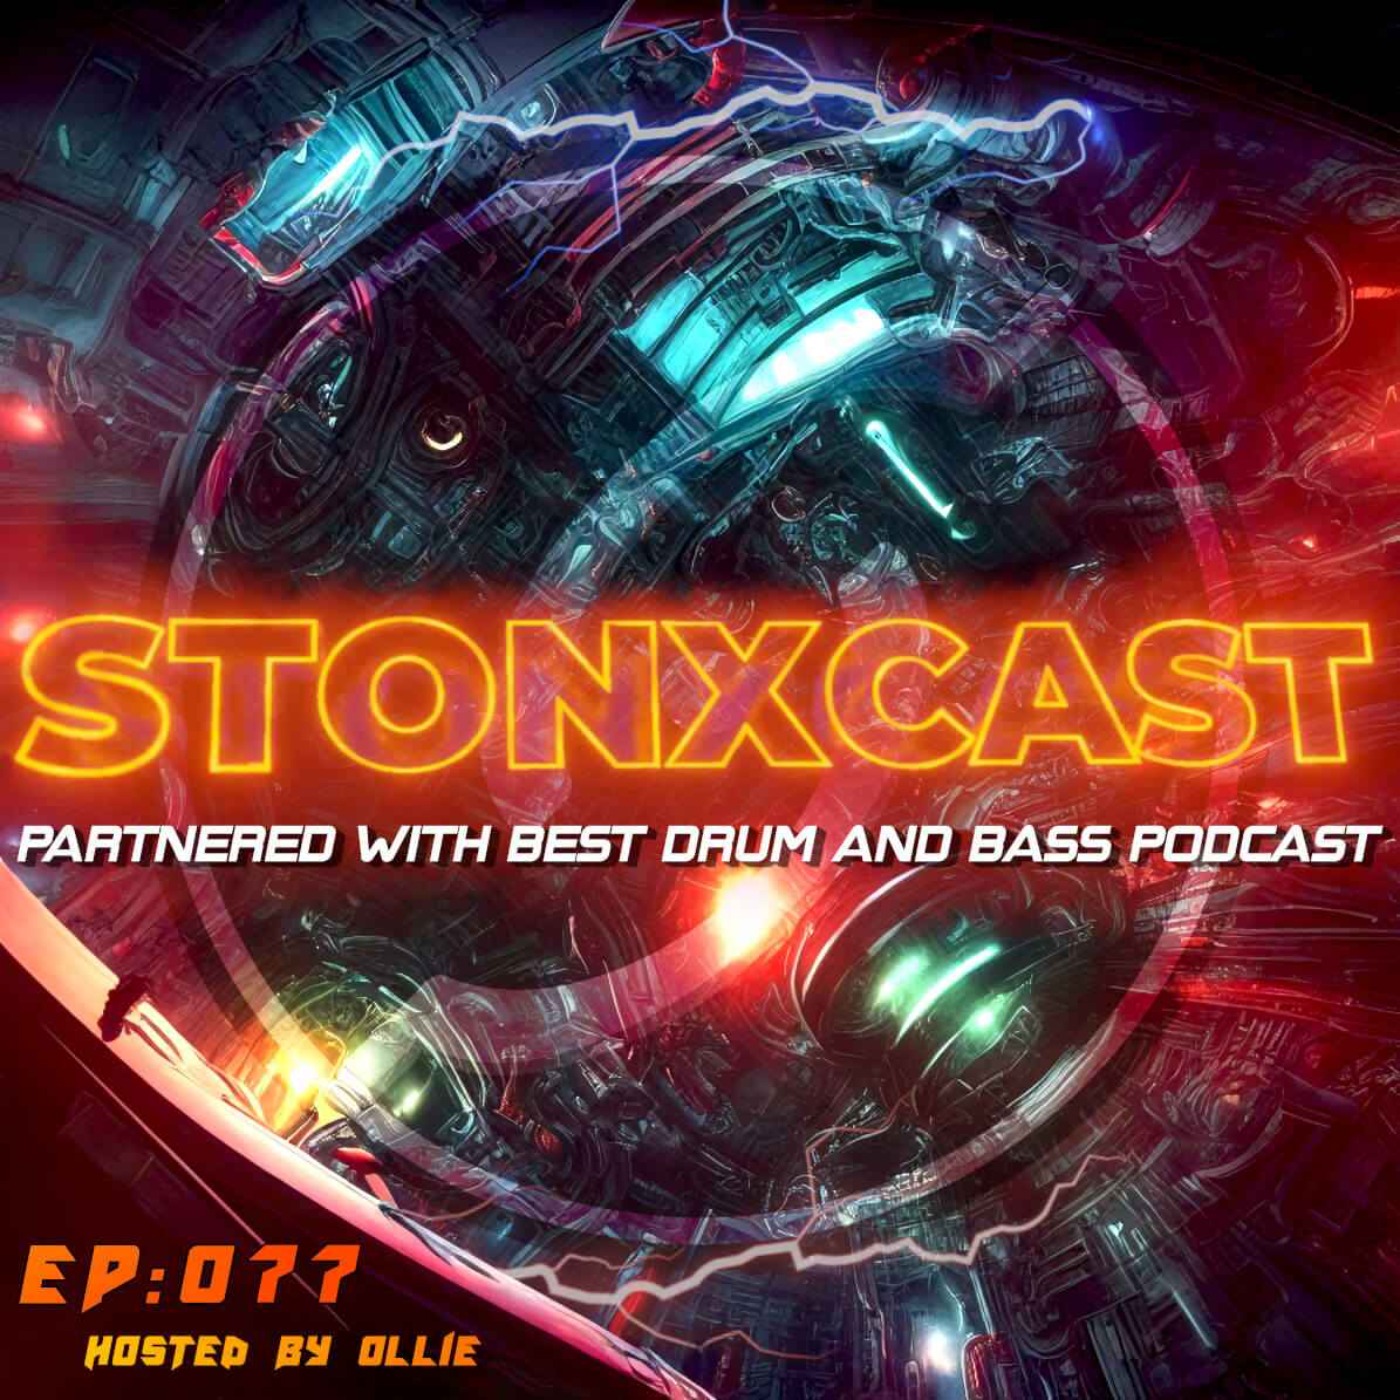 Stonxcast EP:077 - Hosted by Ollie Artwork